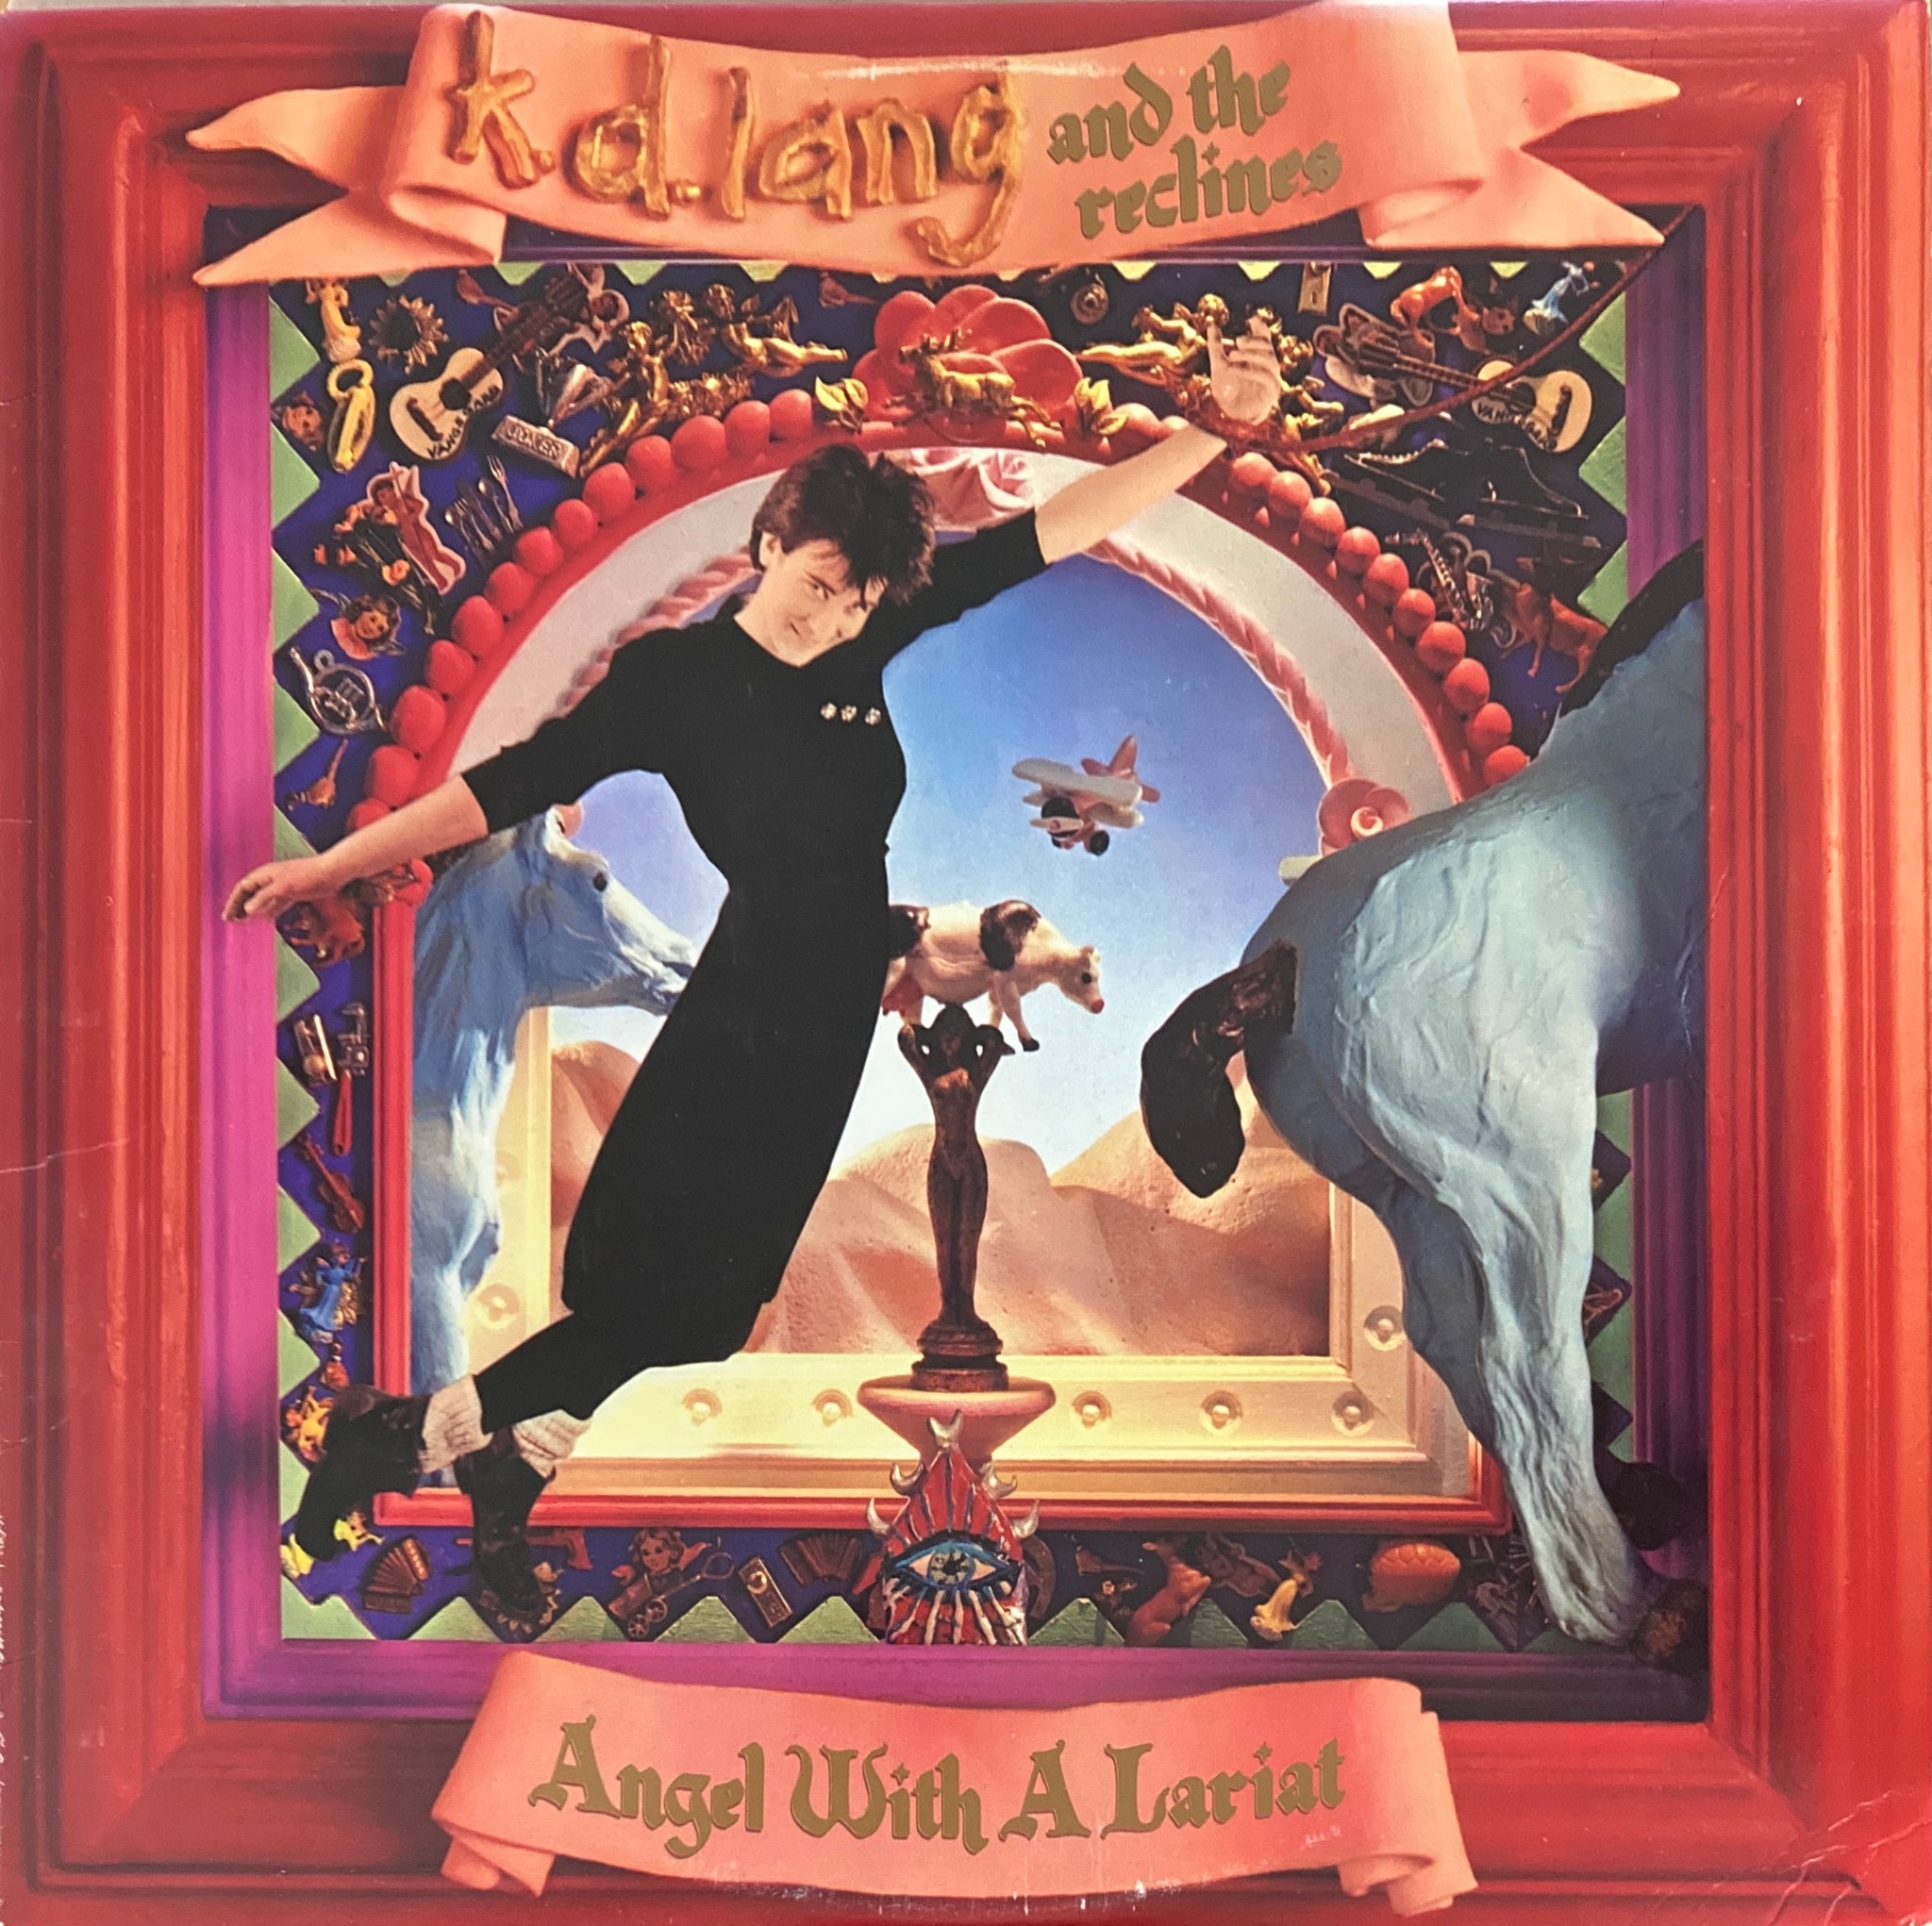 K.D. Lang and The Reclines "Angel With A Lariat" LP (1987)